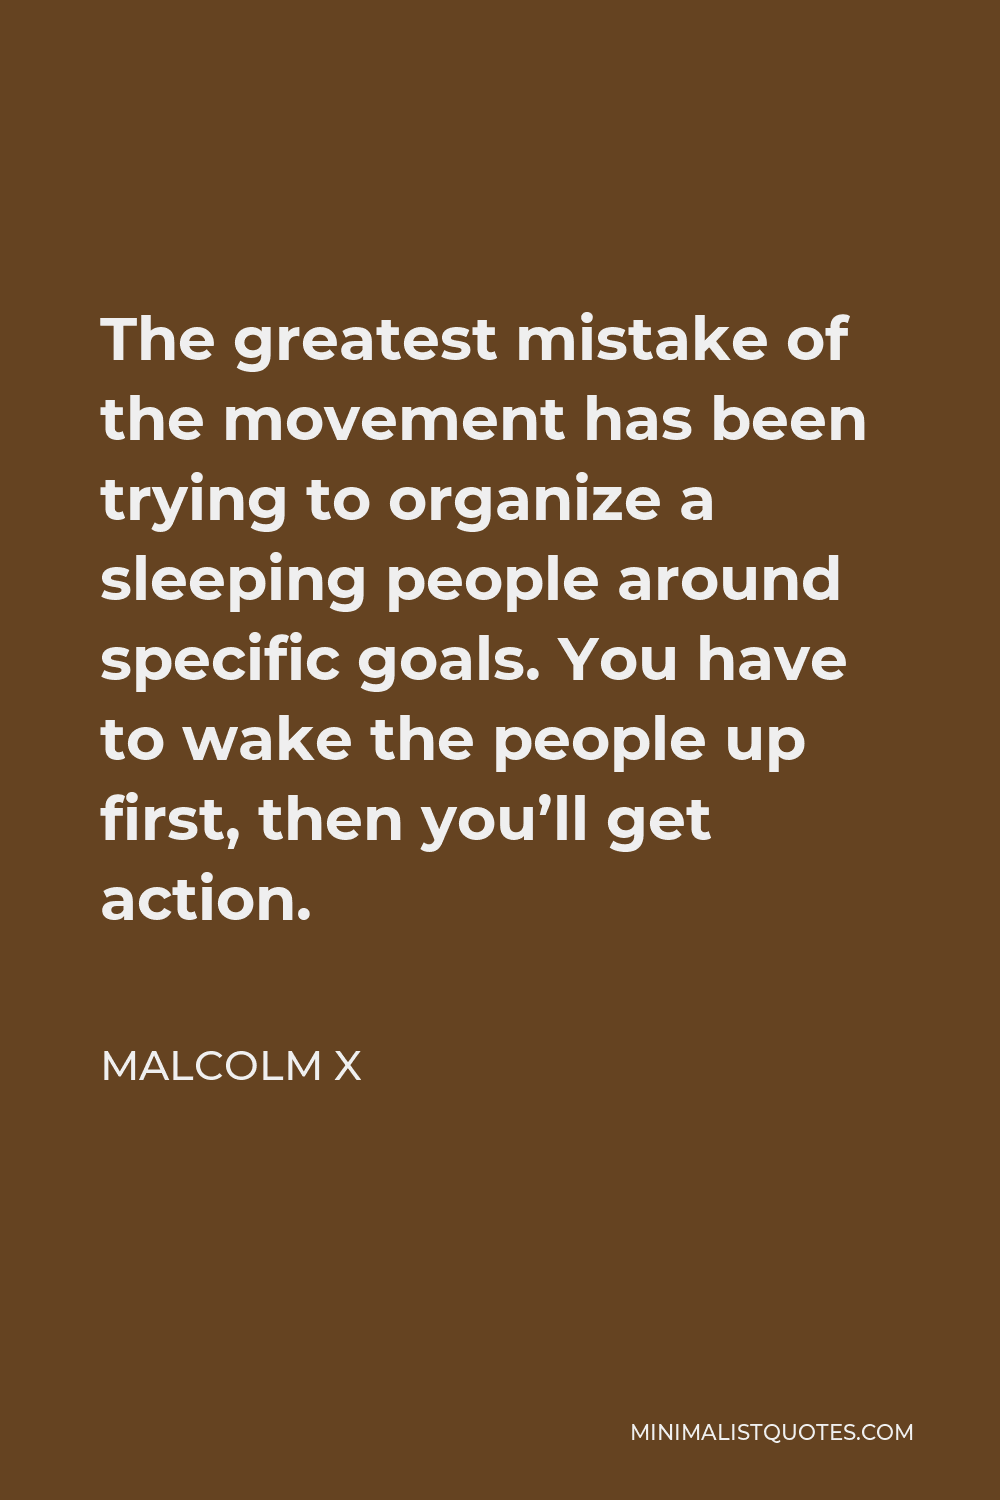 Malcolm X Quote - The greatest mistake of the movement has been trying to organize a sleeping people around specific goals. You have to wake the people up first, then you’ll get action.